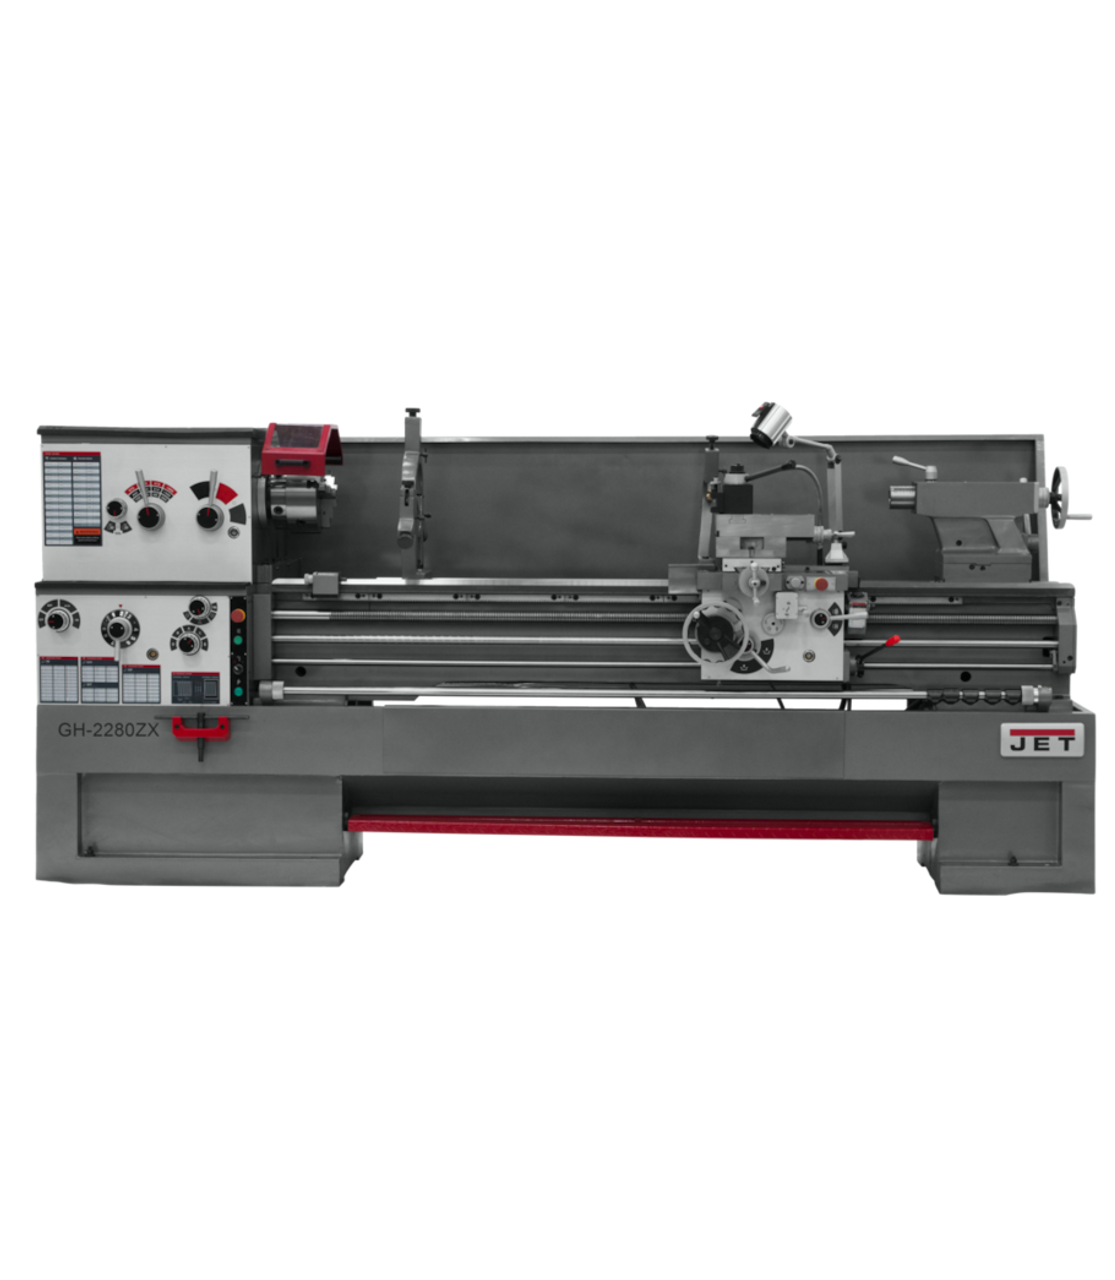 JET GH-2280ZX Large Spindle Bore Lathe with Newall DP700 DRO with Taper Attachment 460V